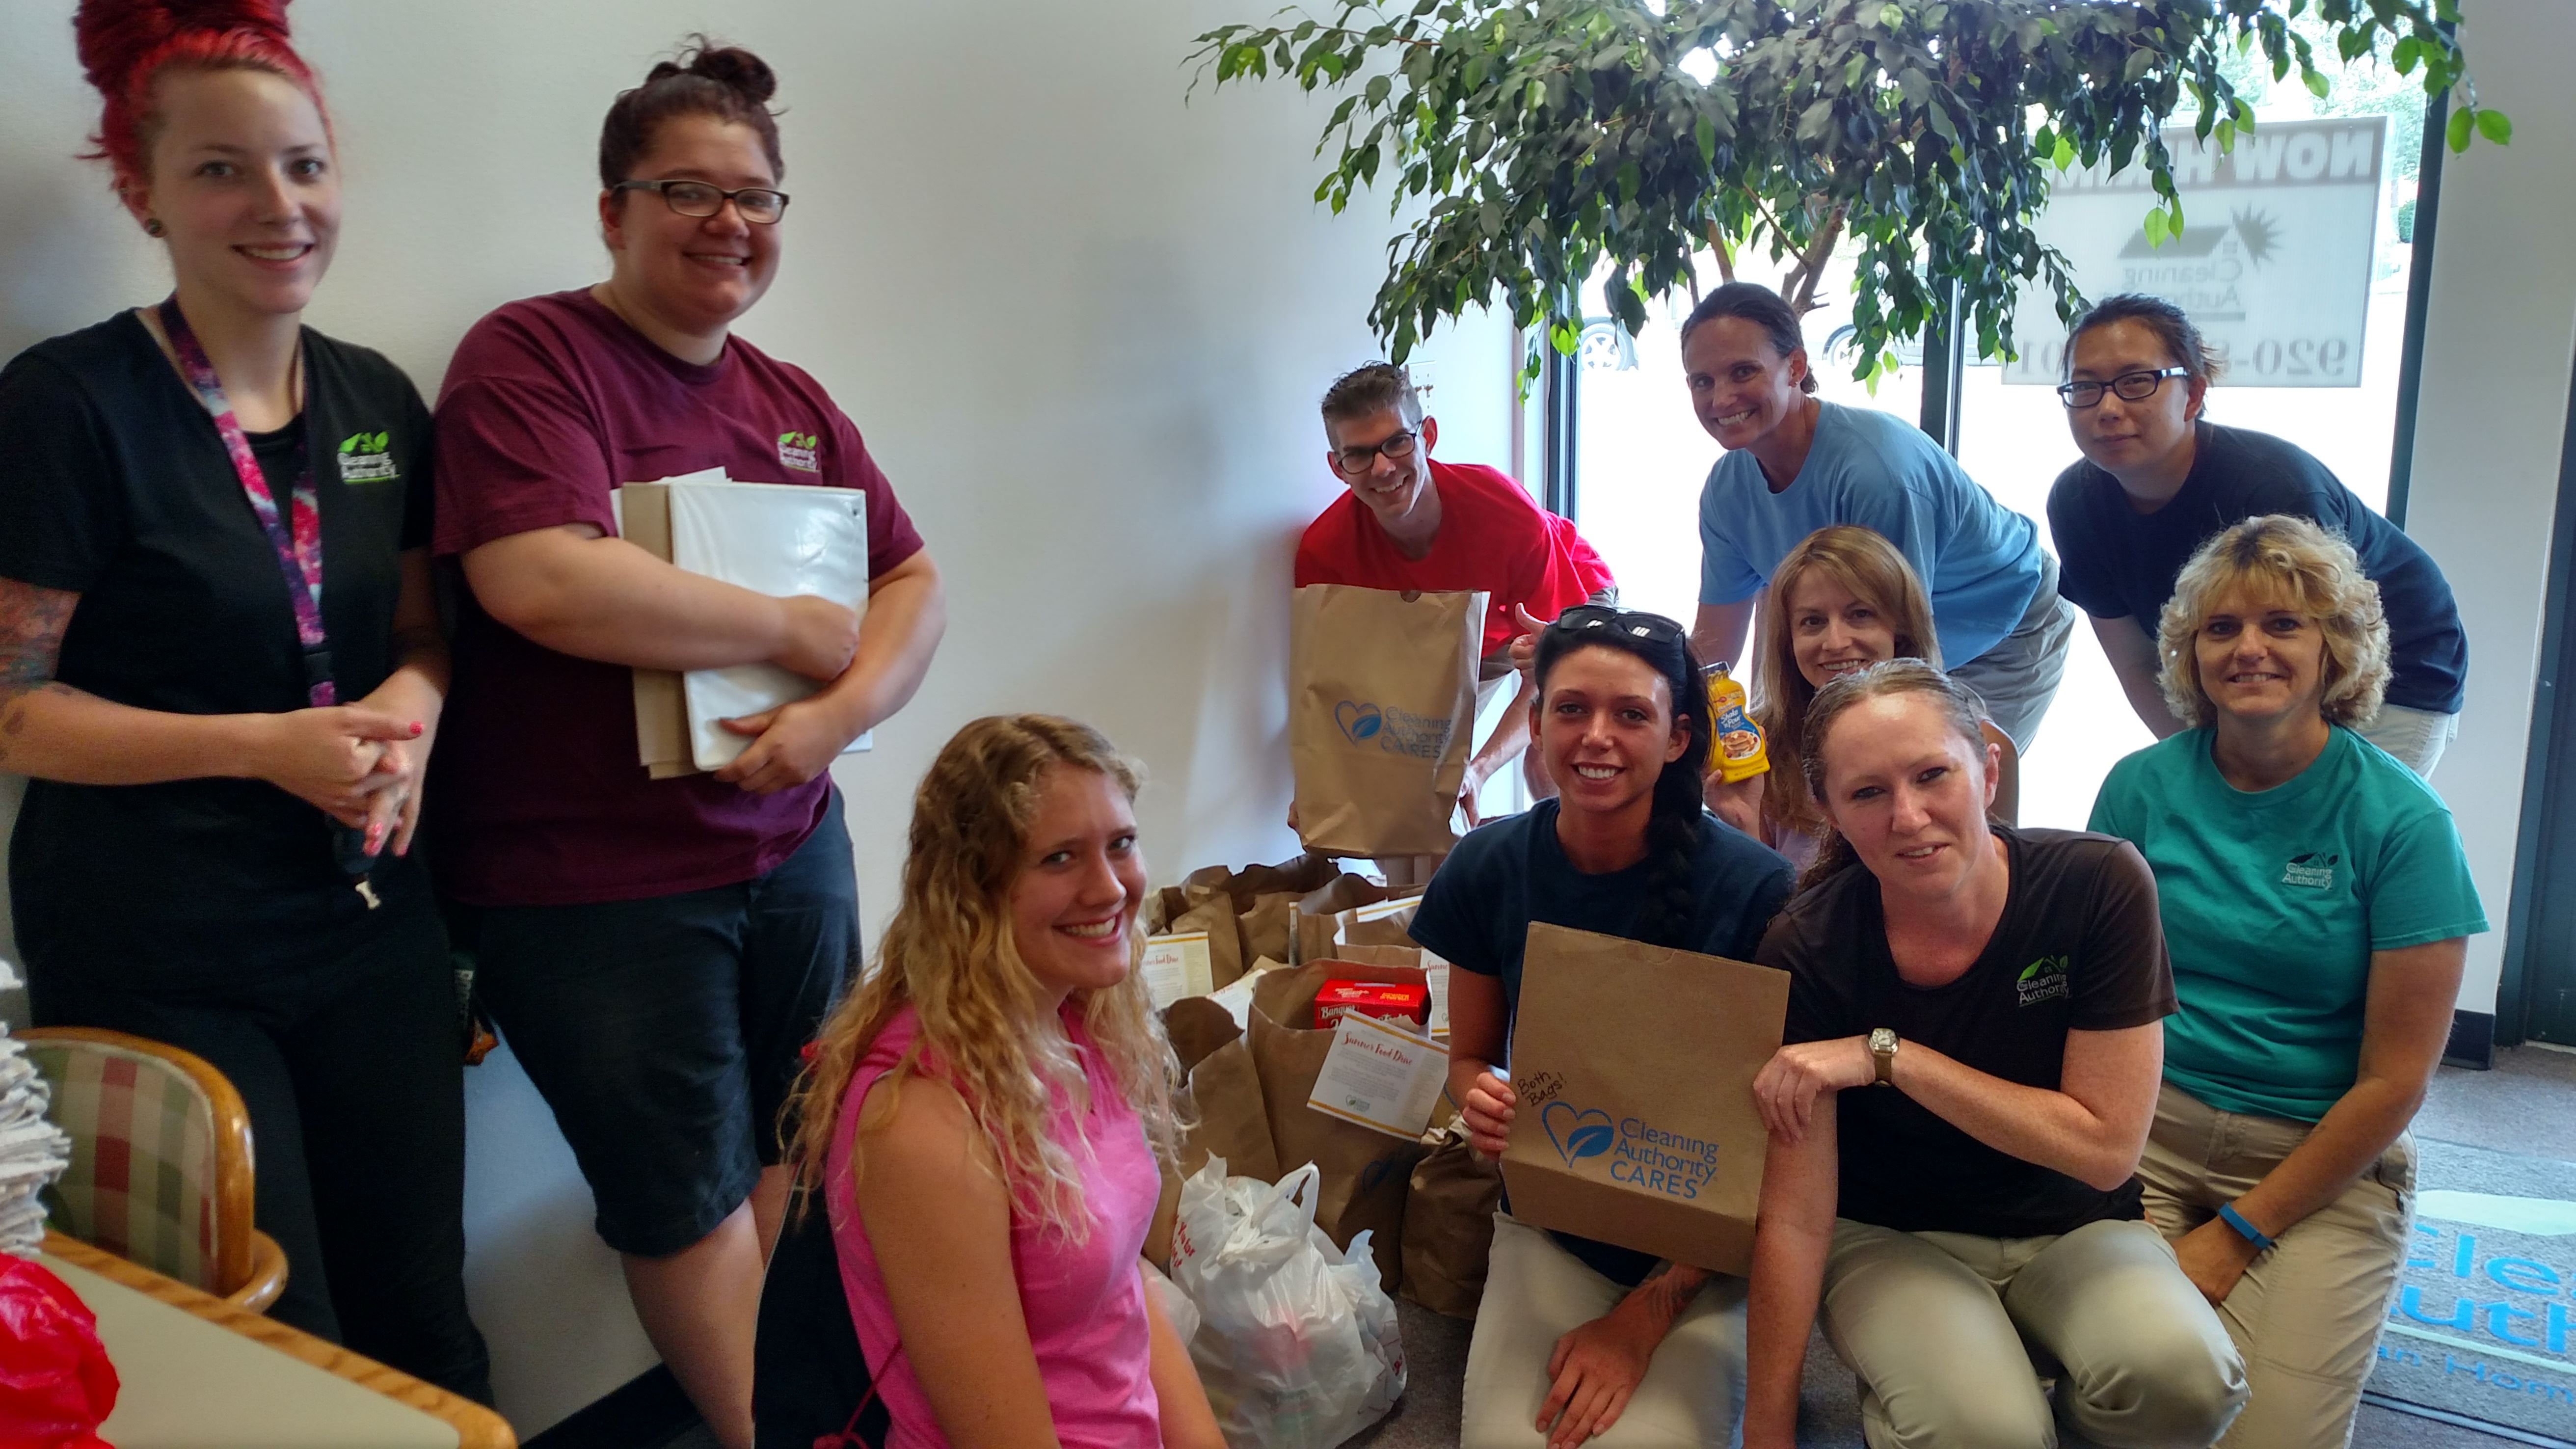 The TCA Appleton team poses with food donations collected for a local food bank.